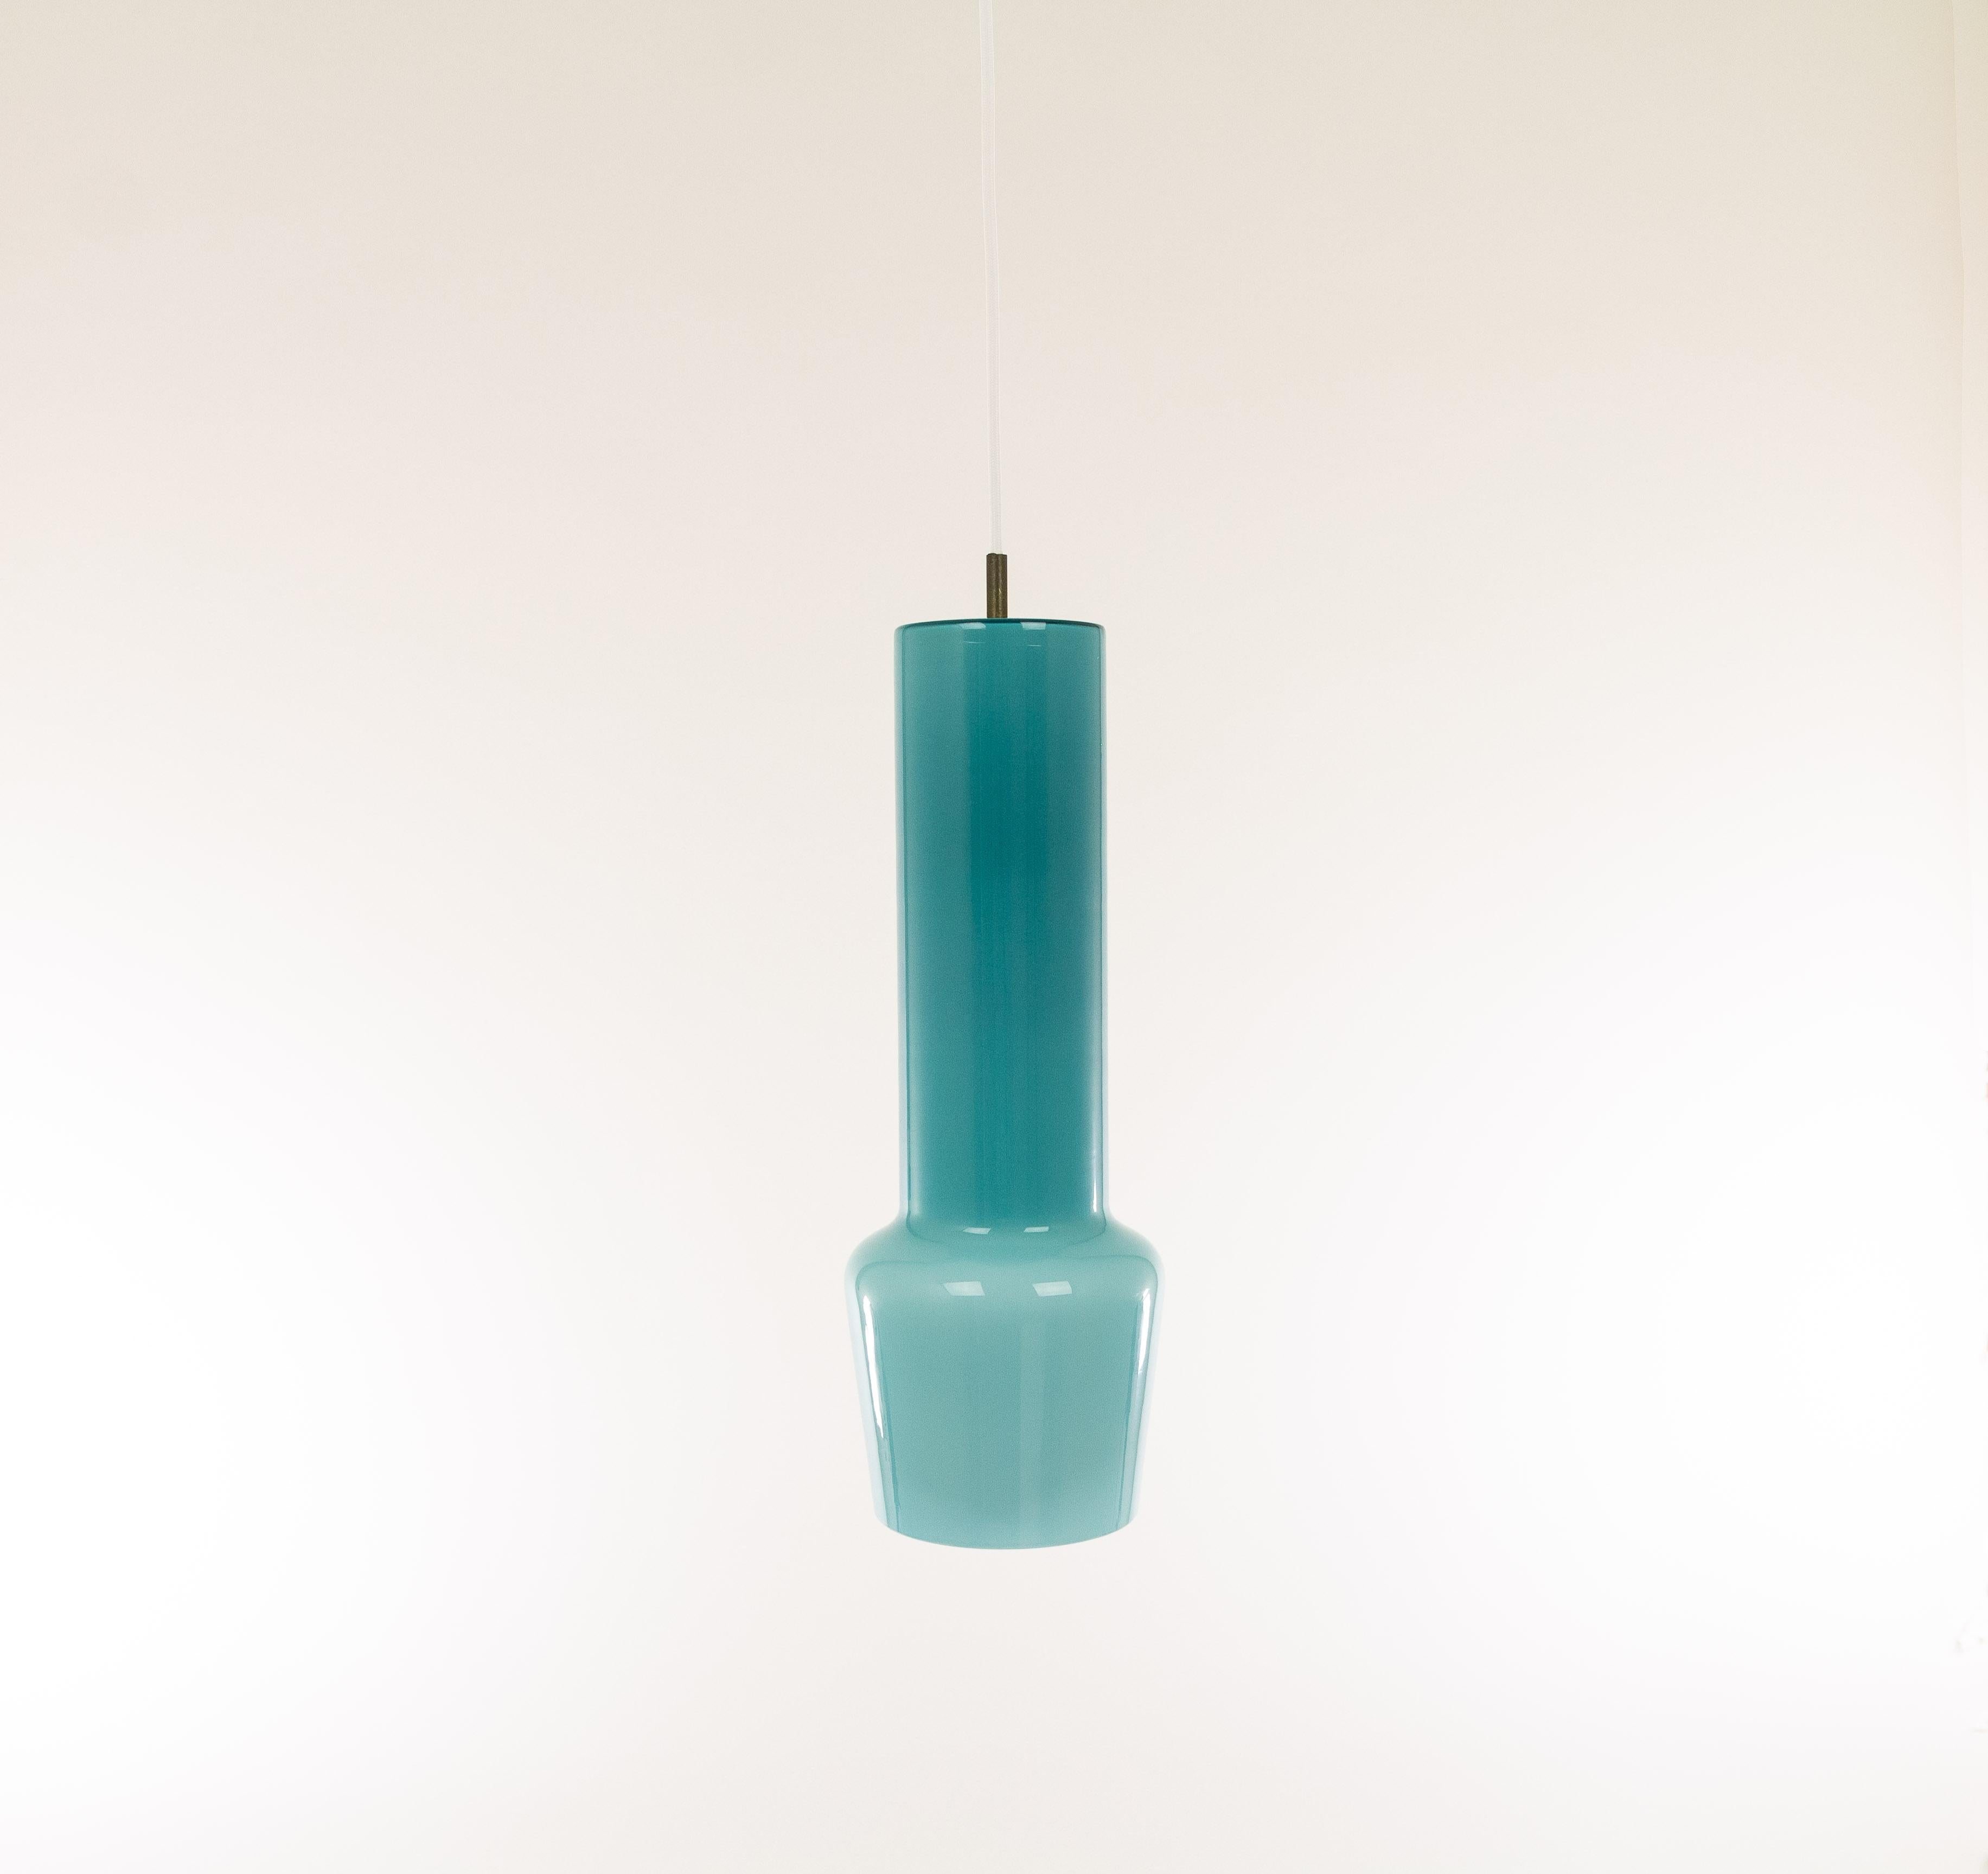 Hand blown turquoise glass pendant no. 011.11 designed by Massimo Vignelli at the start of his impressive career in design and executed by Murano glass specialist Venini. 

One of the most characteristic lamps that Vignelli designed for Venini.